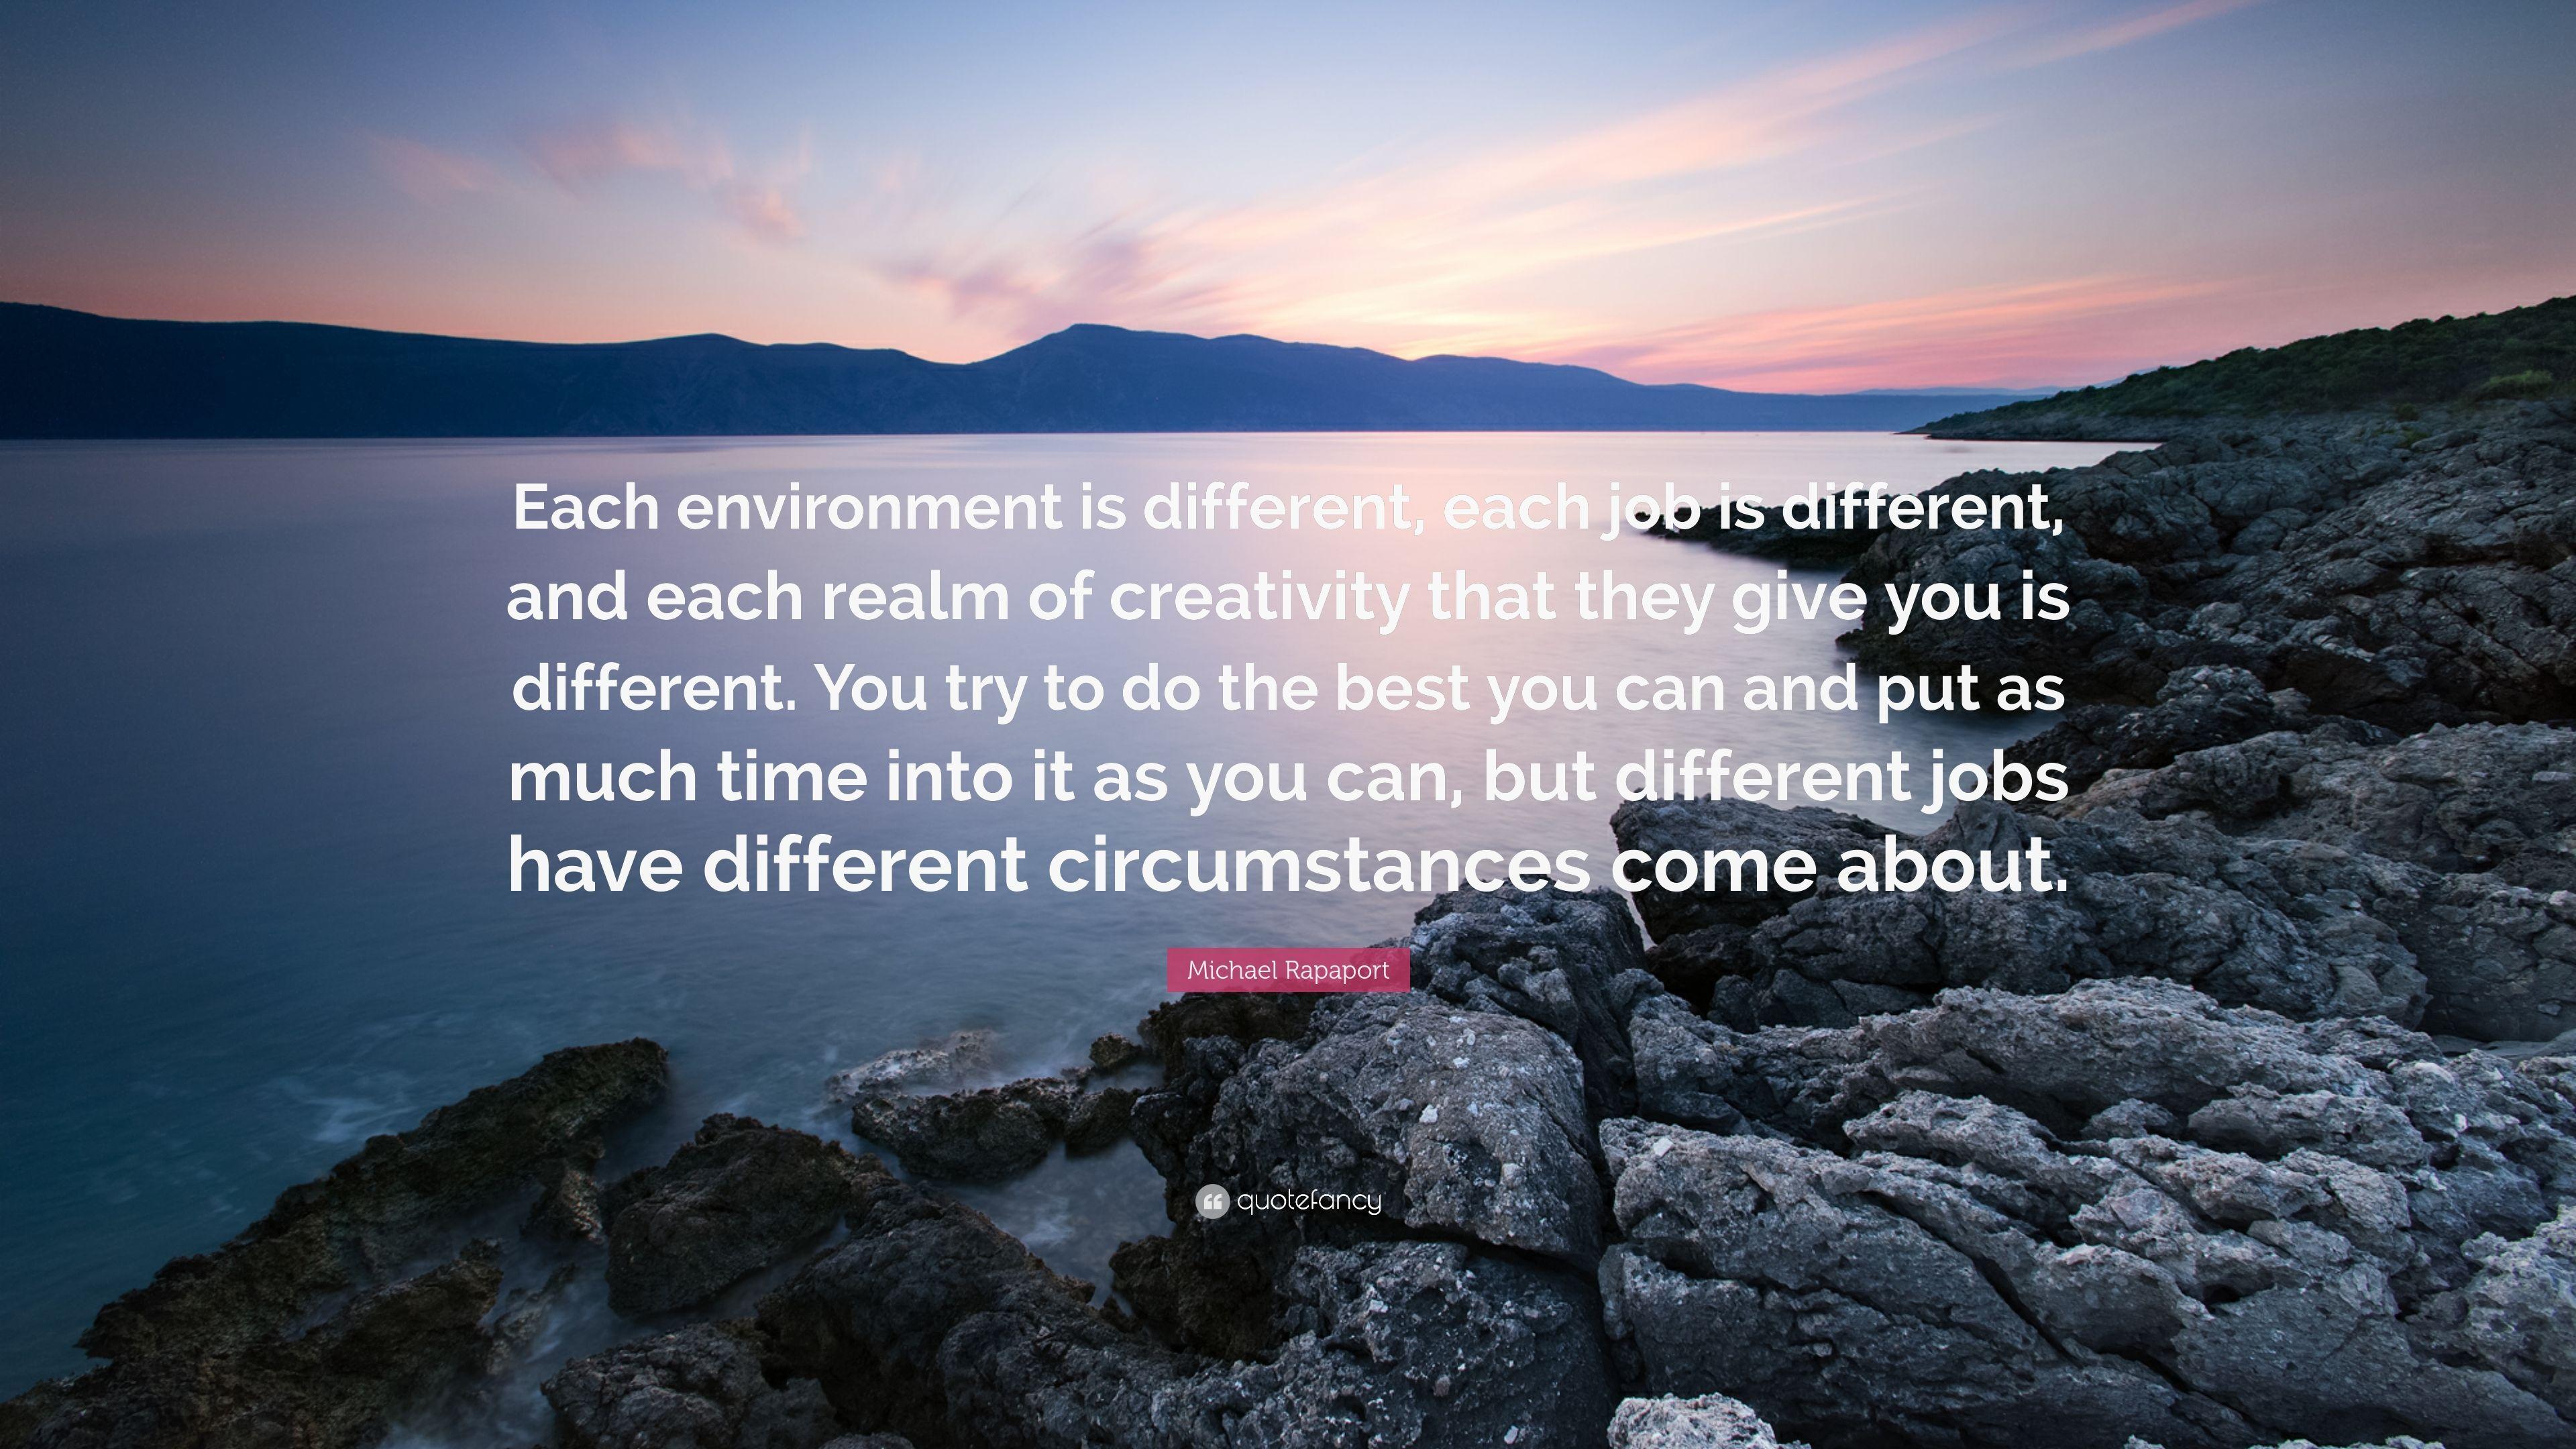 Michael Rapaport Quote: “Each environment is different, each job